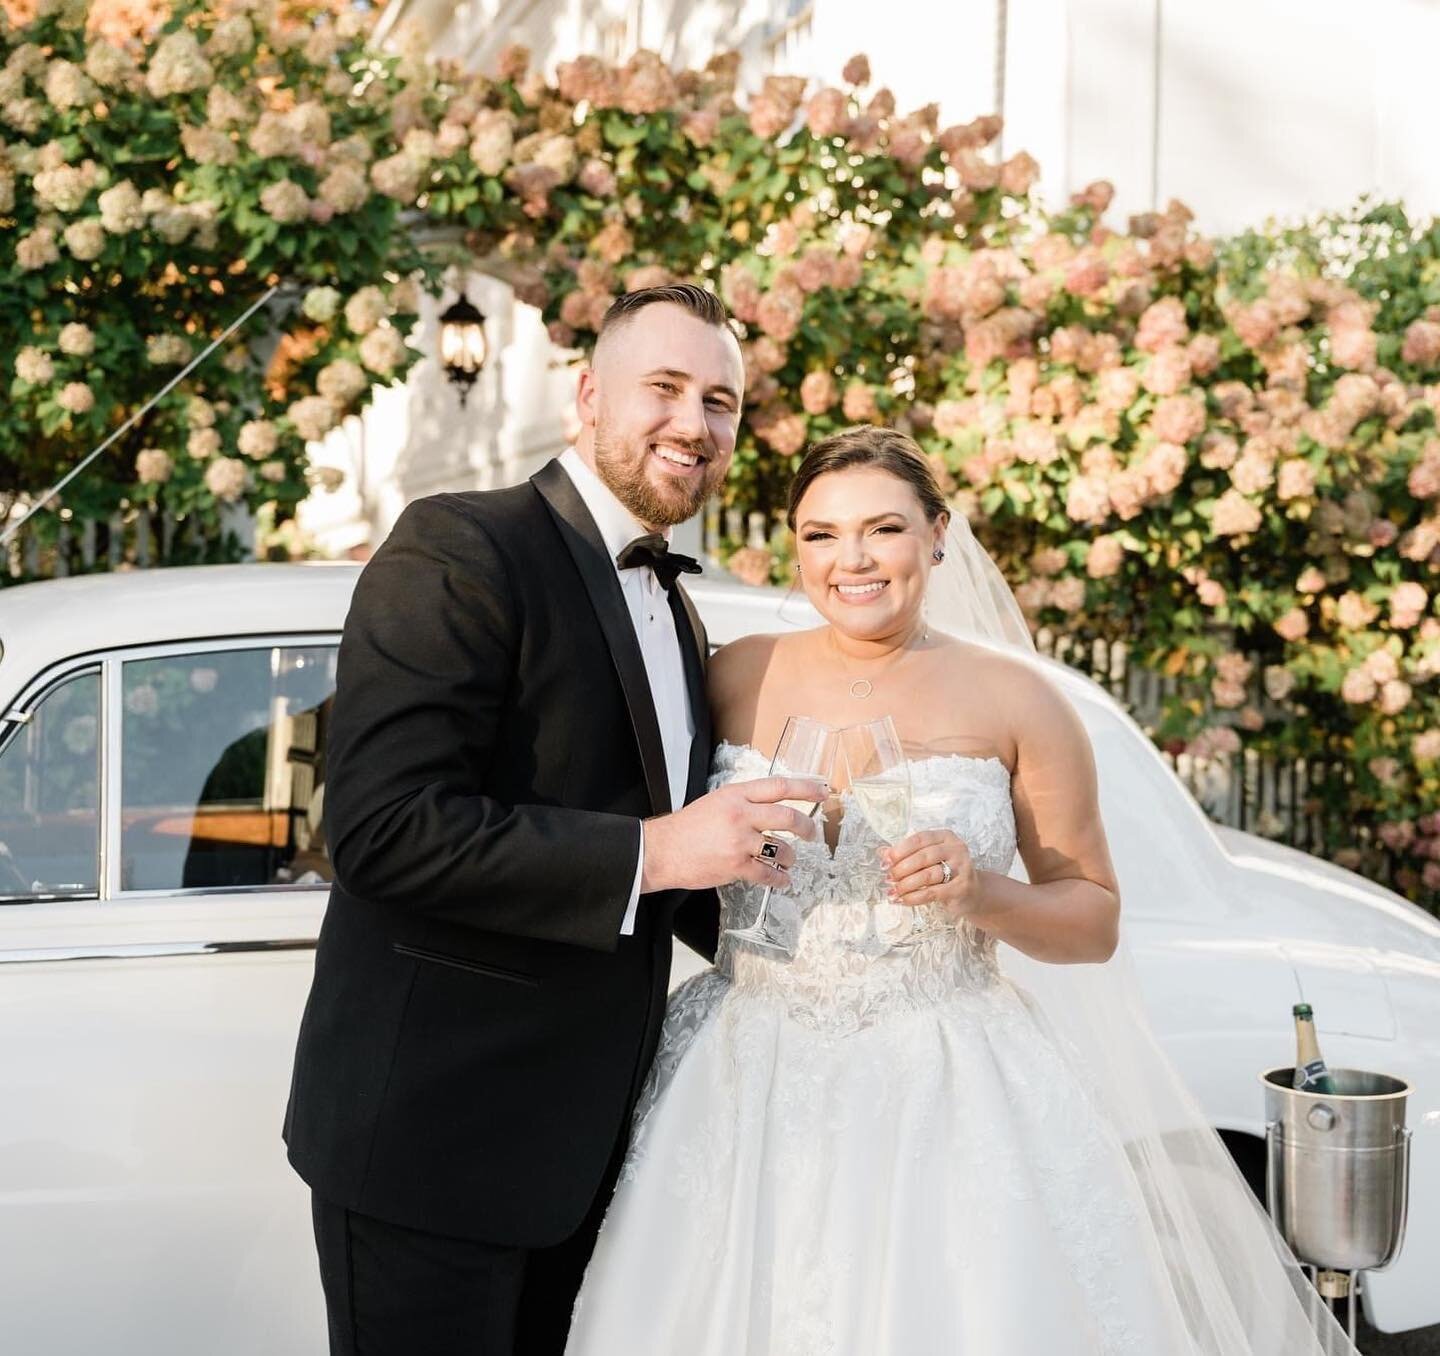 These smiles say it all! Congratulations - we would host your massively fun celebration over, and over again, if we could! 🎉🤍💍

📸 @paneraibarry